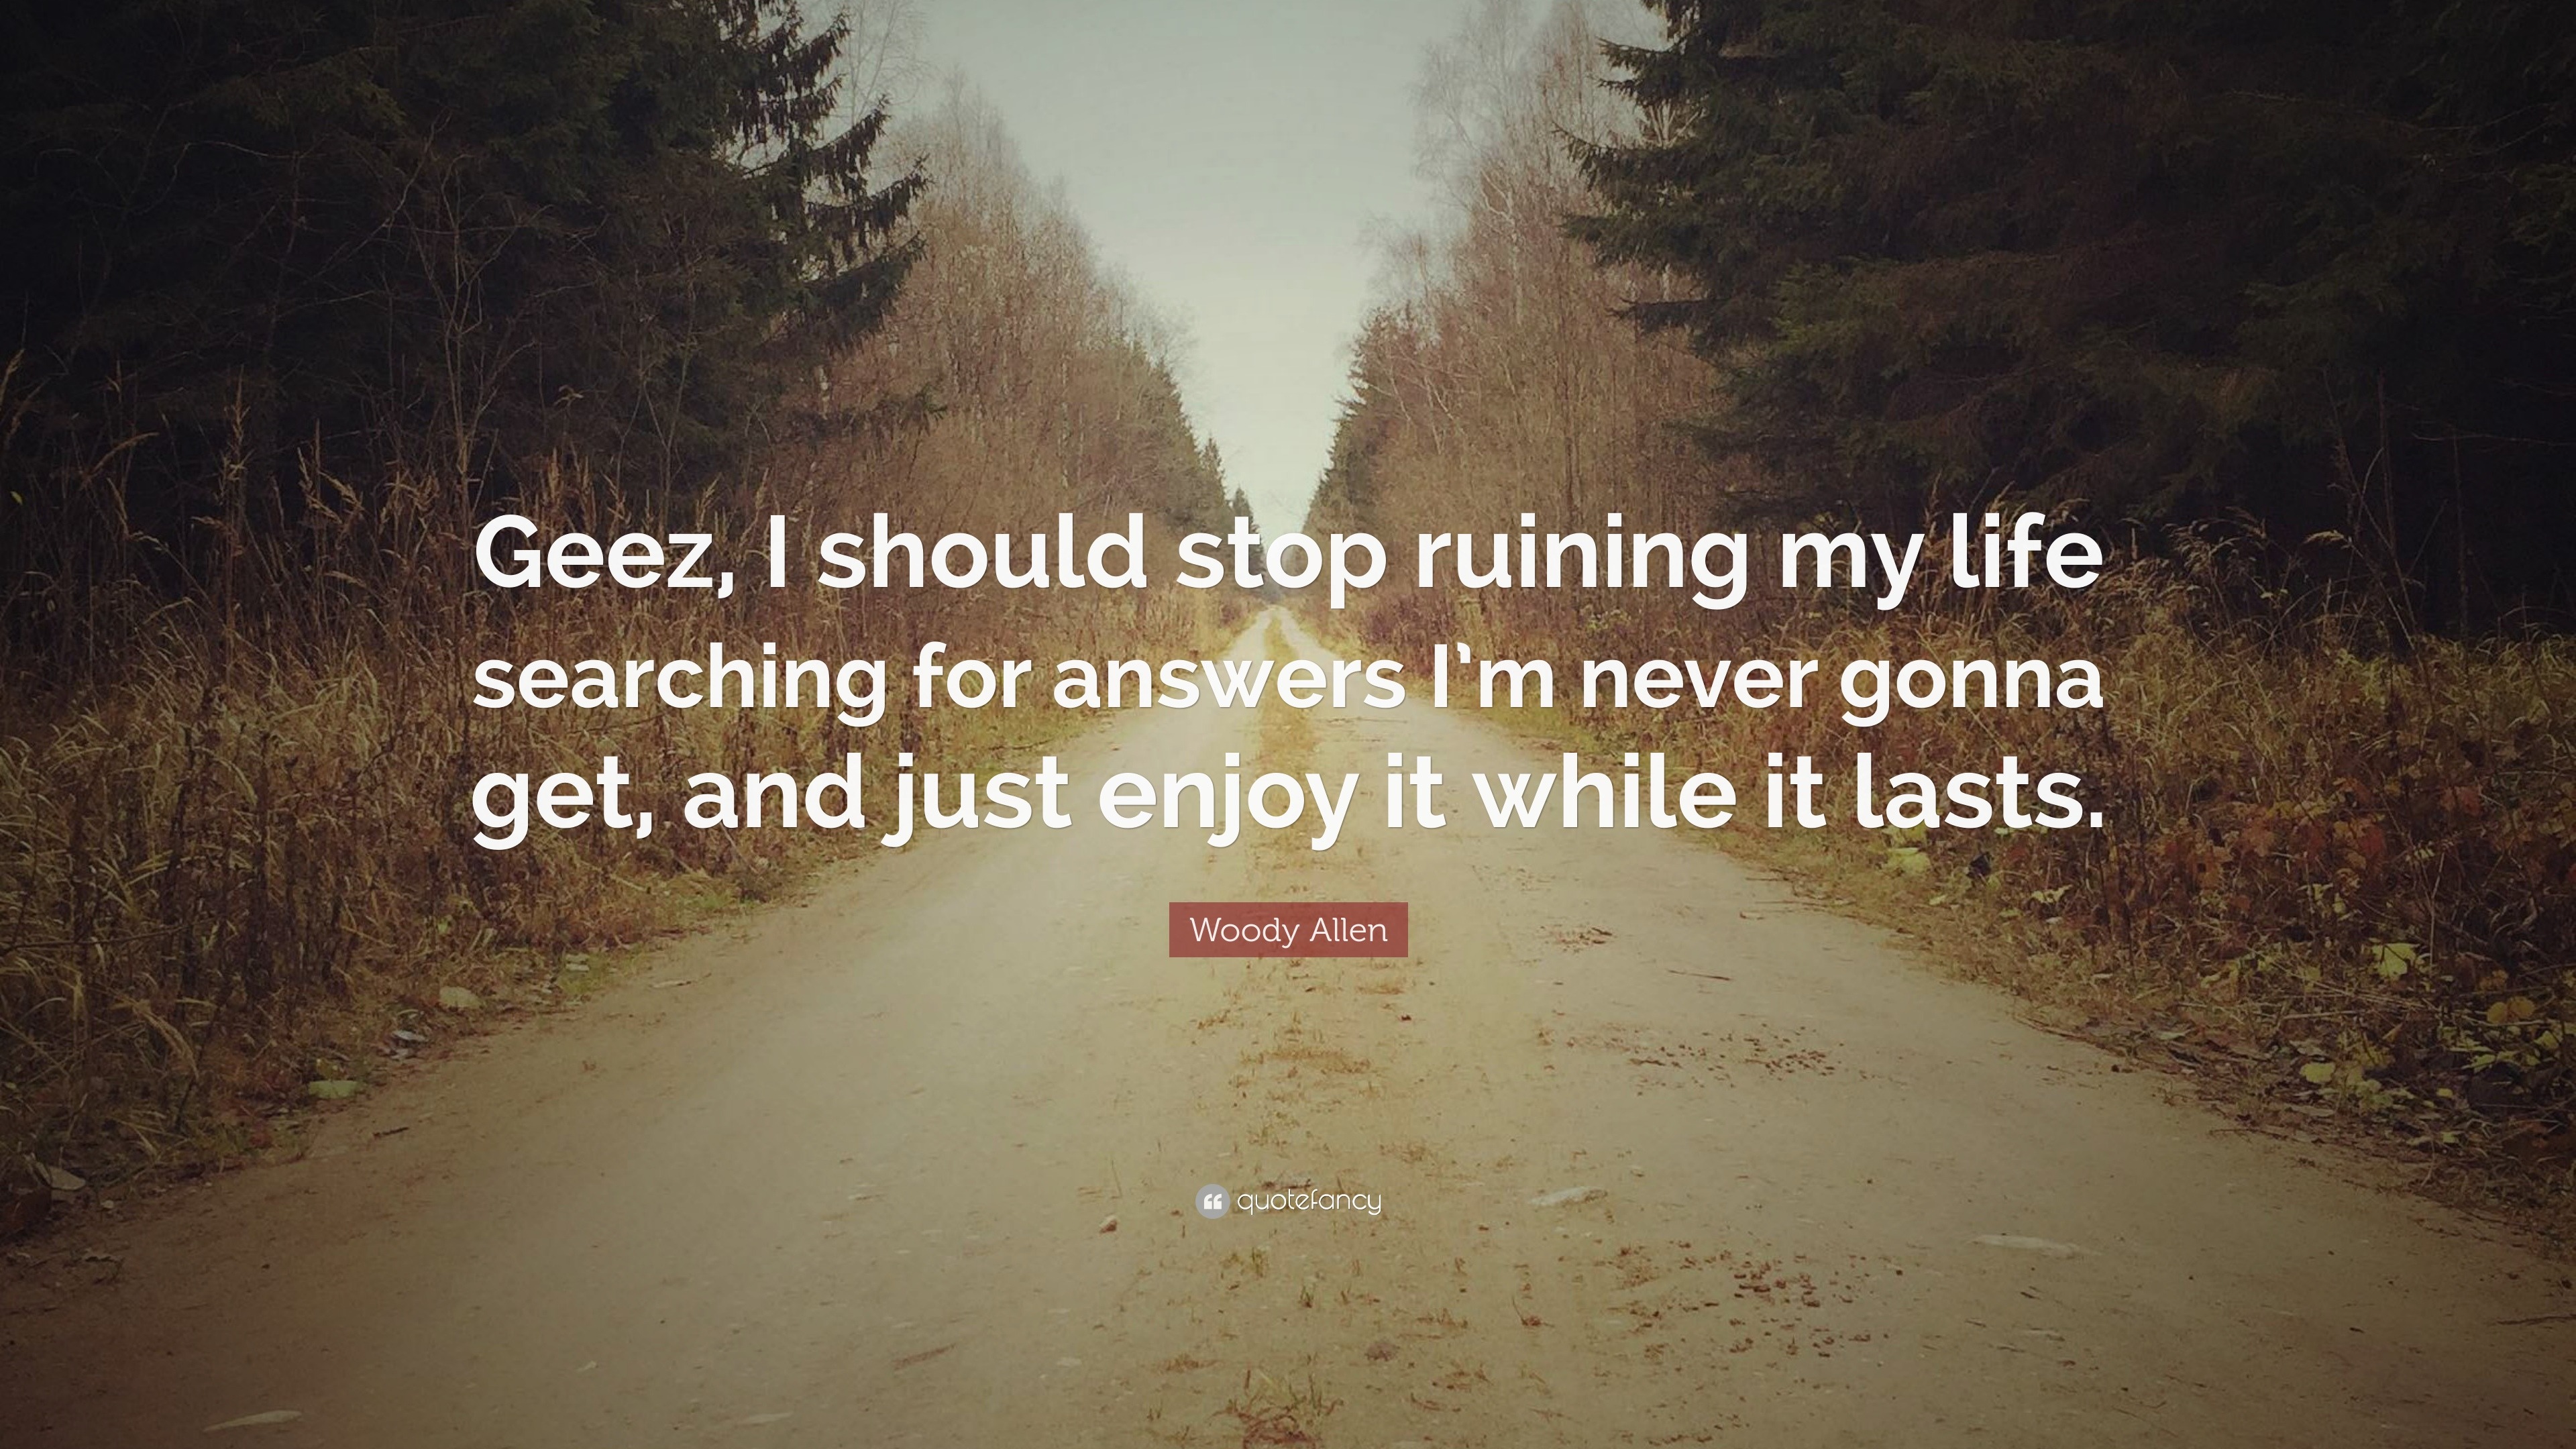 Woody Allen Quote “Geez I should stop ruining my life searching for answers